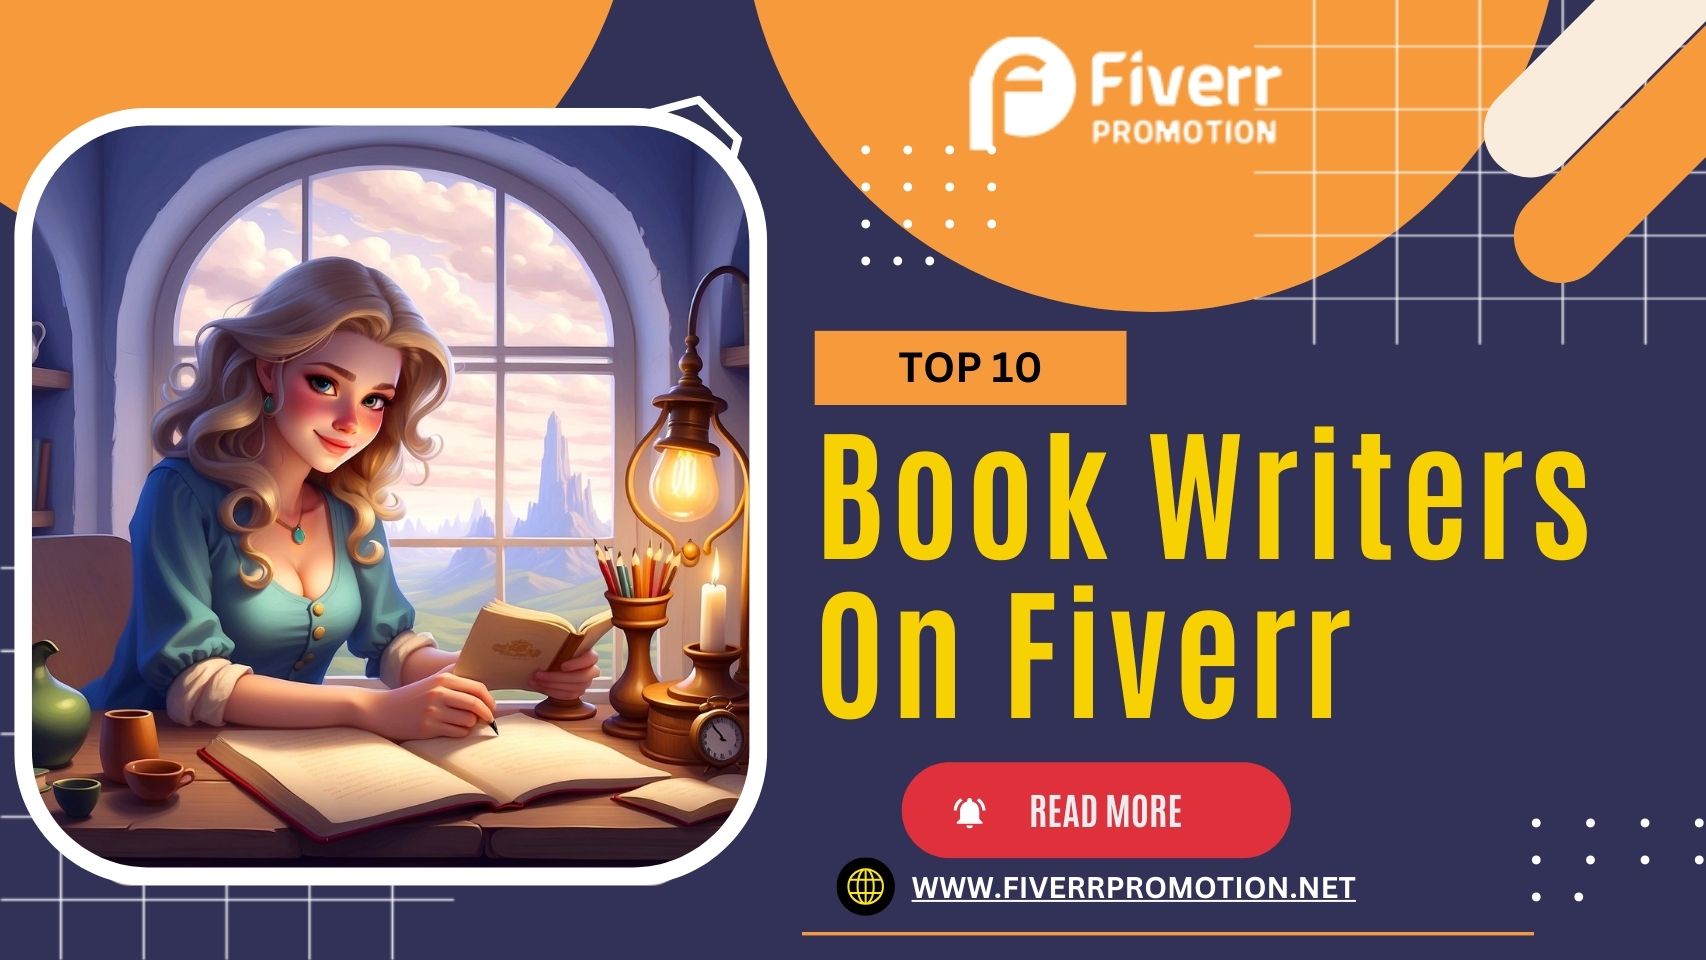 Top 10 Book Writers on Fiverr